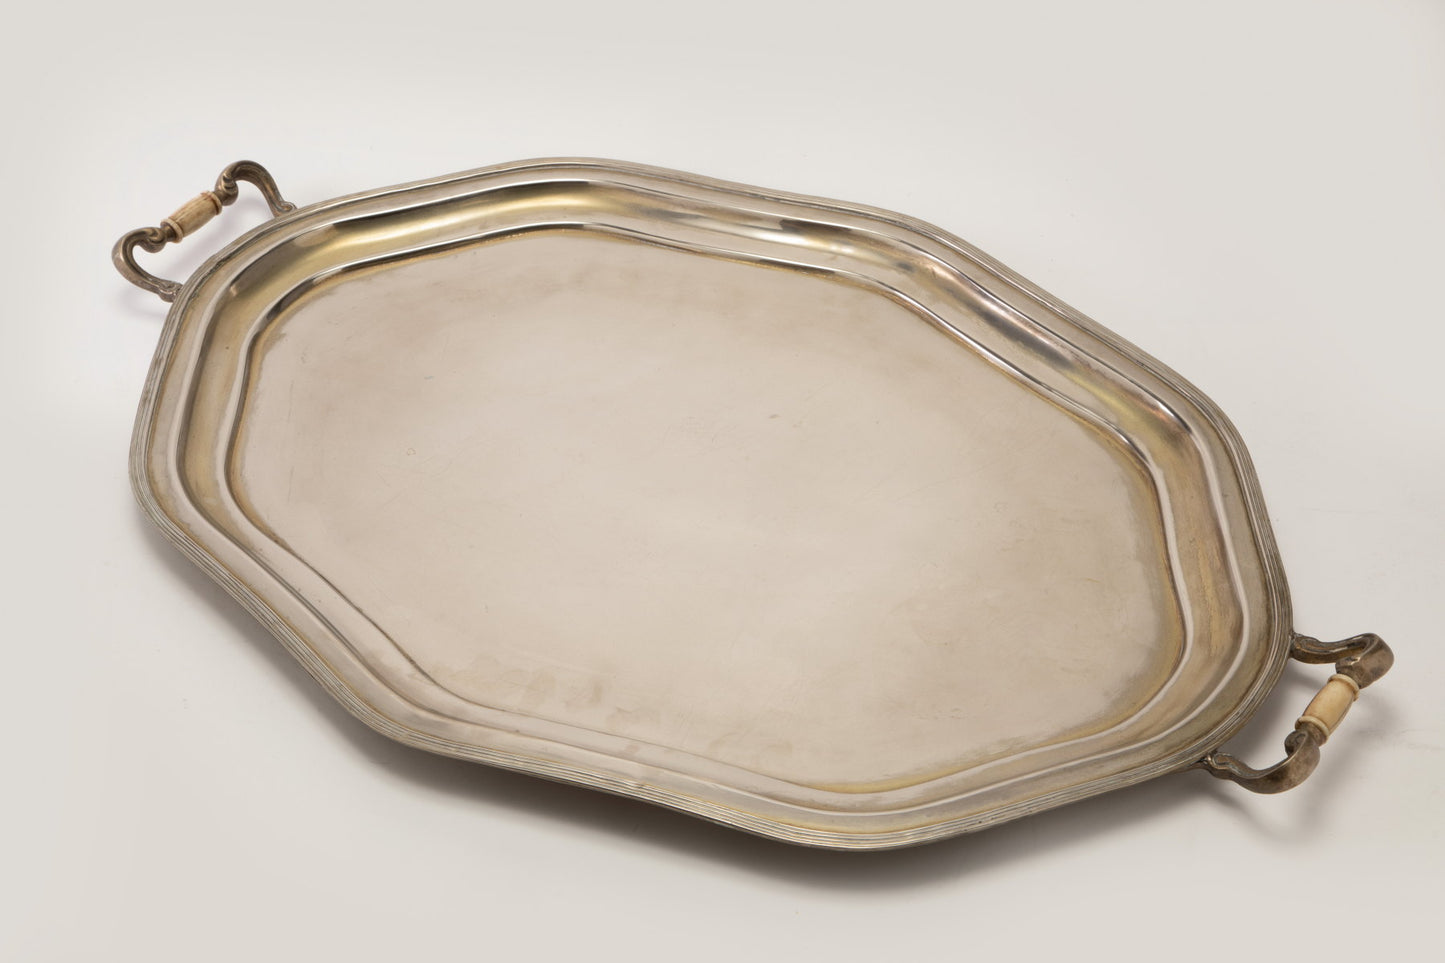 Large silver plated tray with bone handles from the 1940s